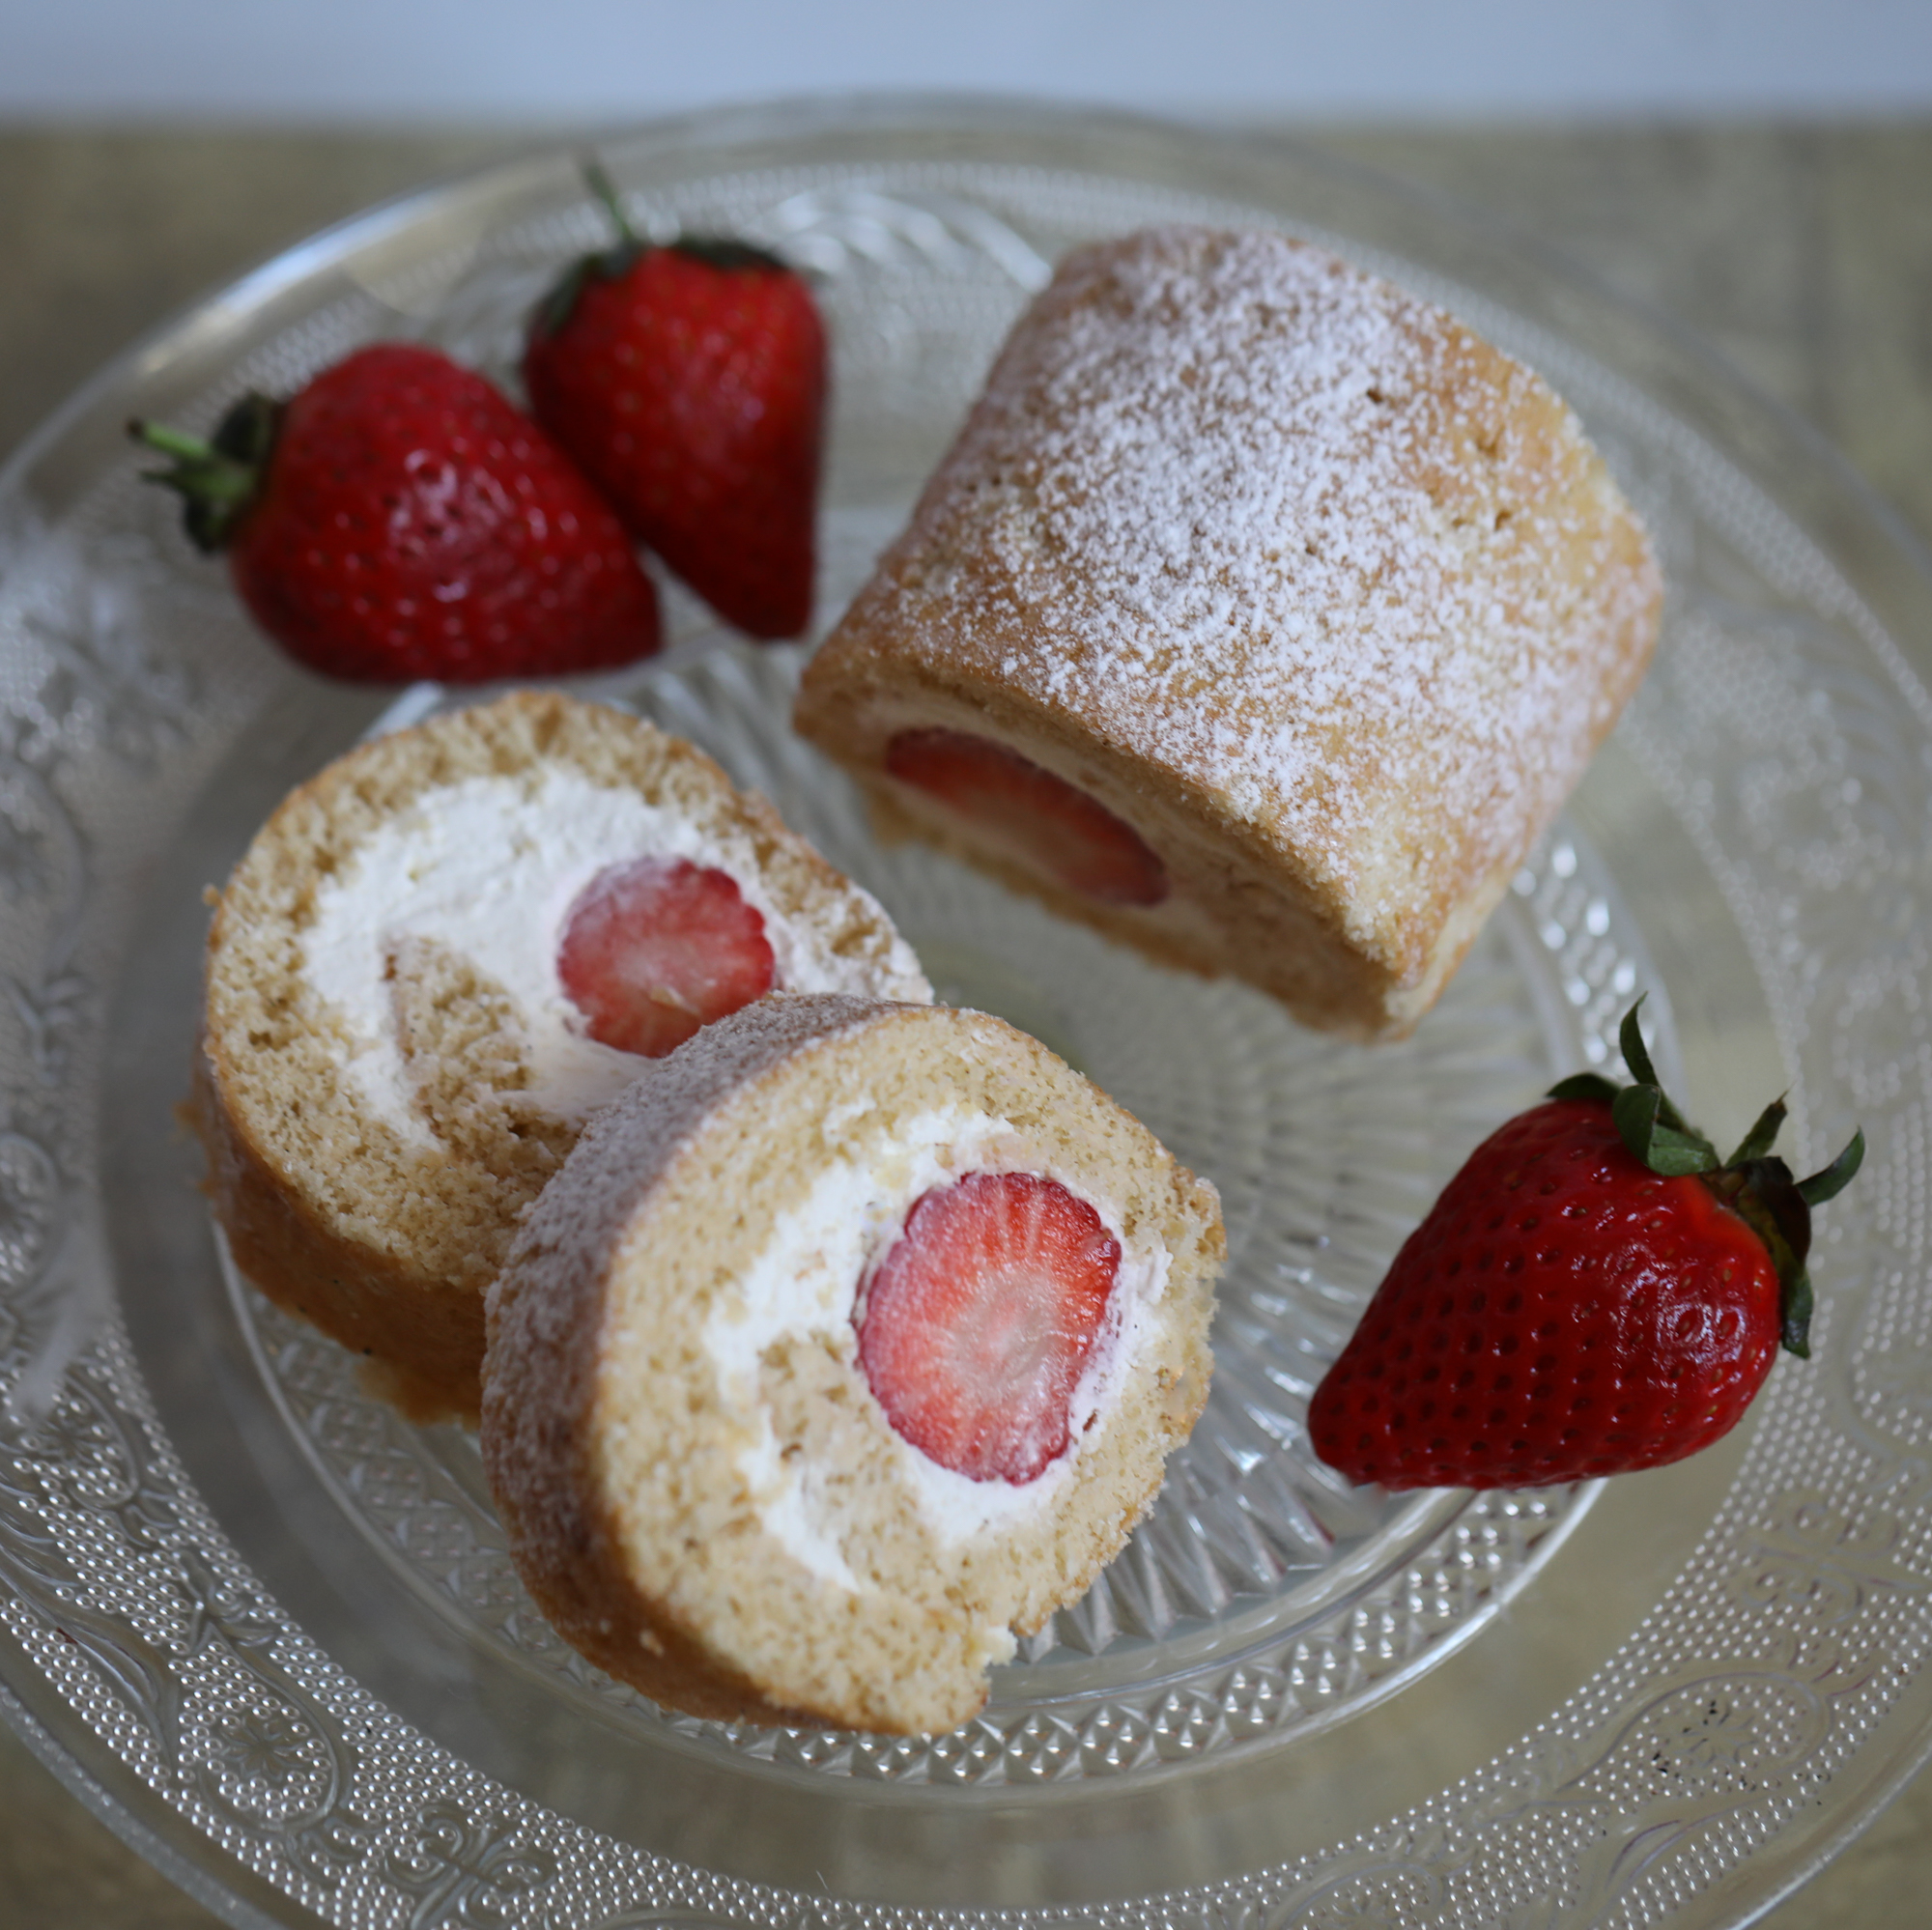 Japanese-style strawberry and cream roll cake recipe!